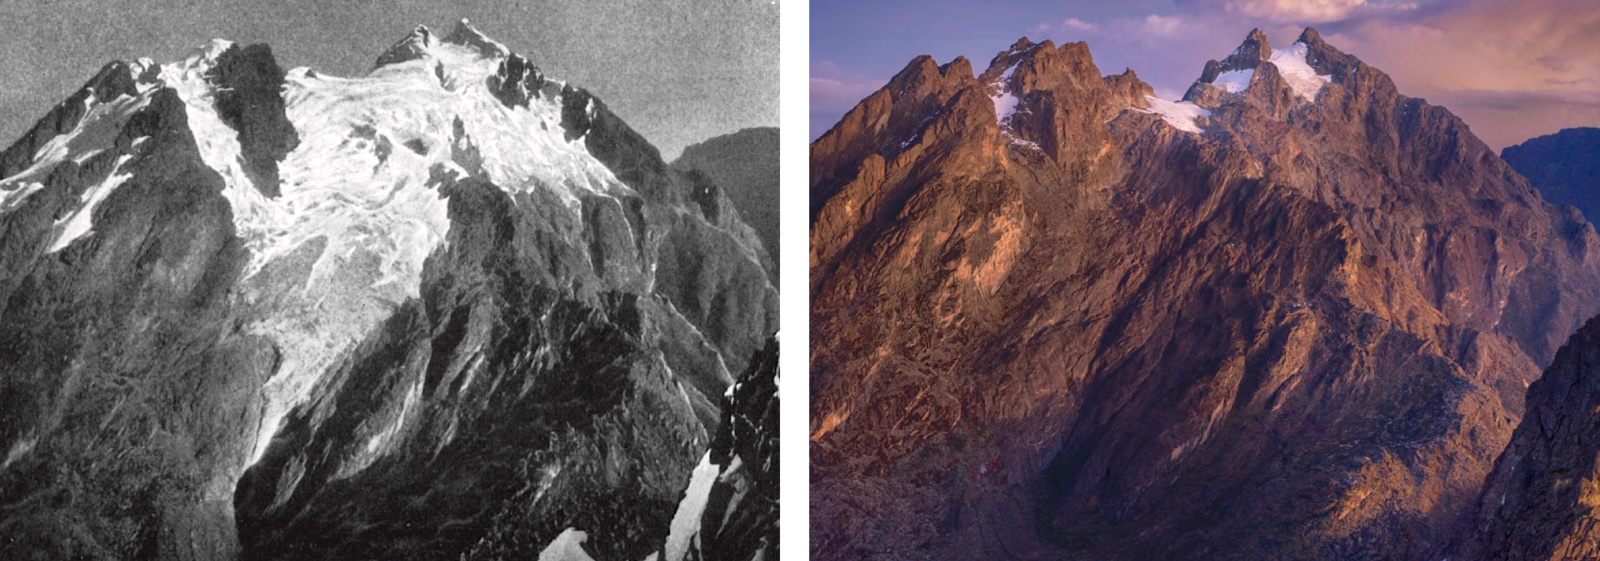 Two photos of mountains side by side show one on the left with a lot of snow and ice, and one on the right with very little snow or ice.